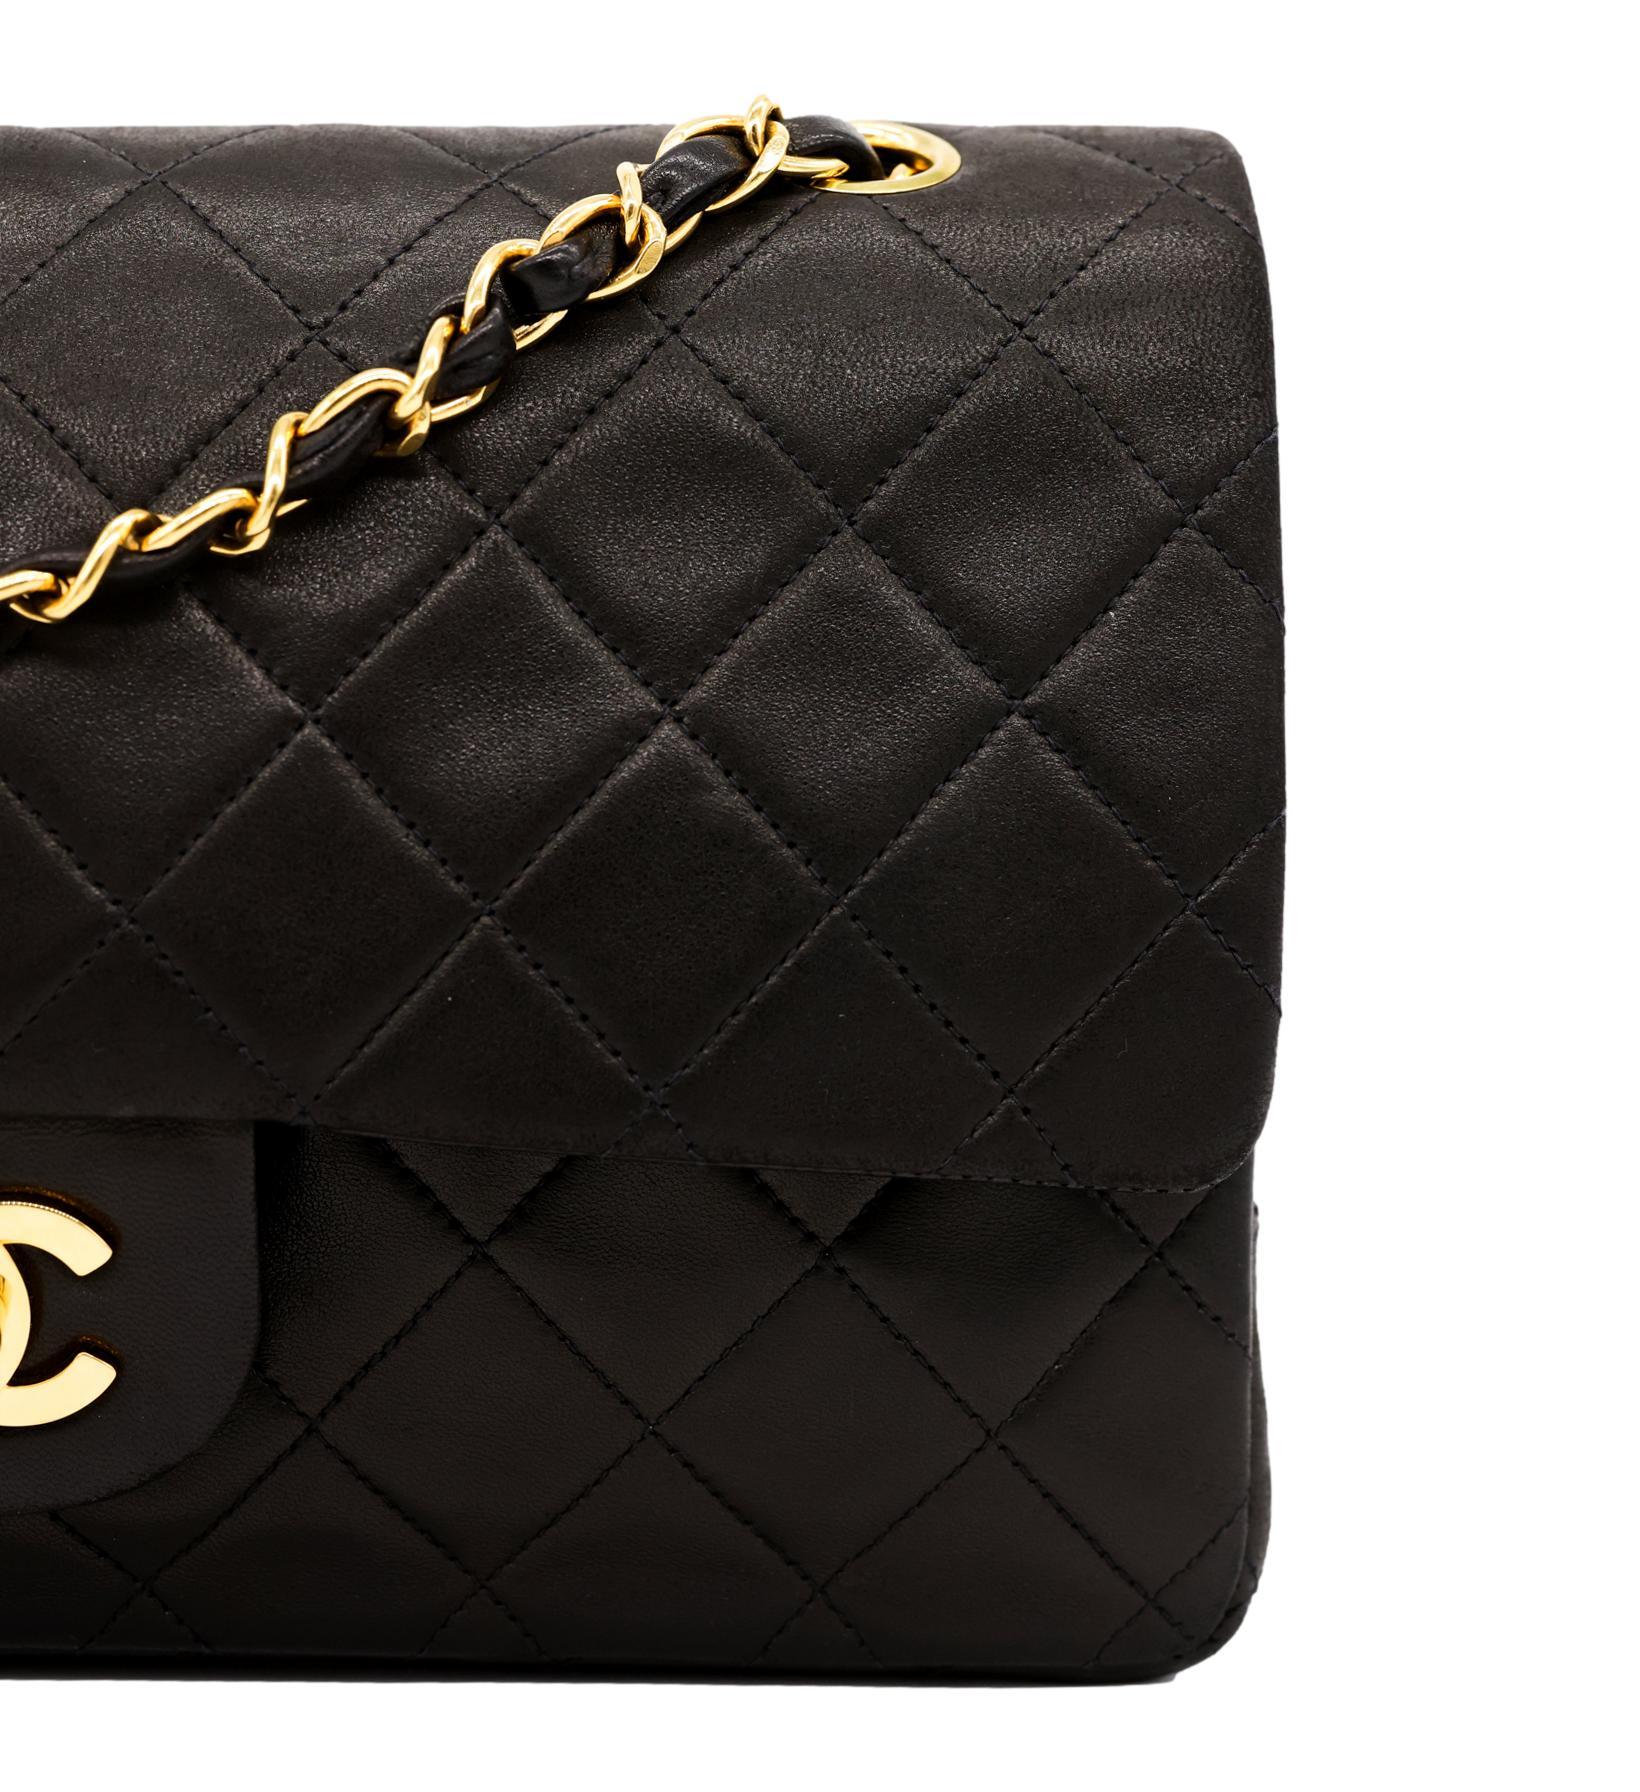 Chanel Timeless Black Medium Double Flap Quilted Lambskin Shoulder Bag, 2019. 4